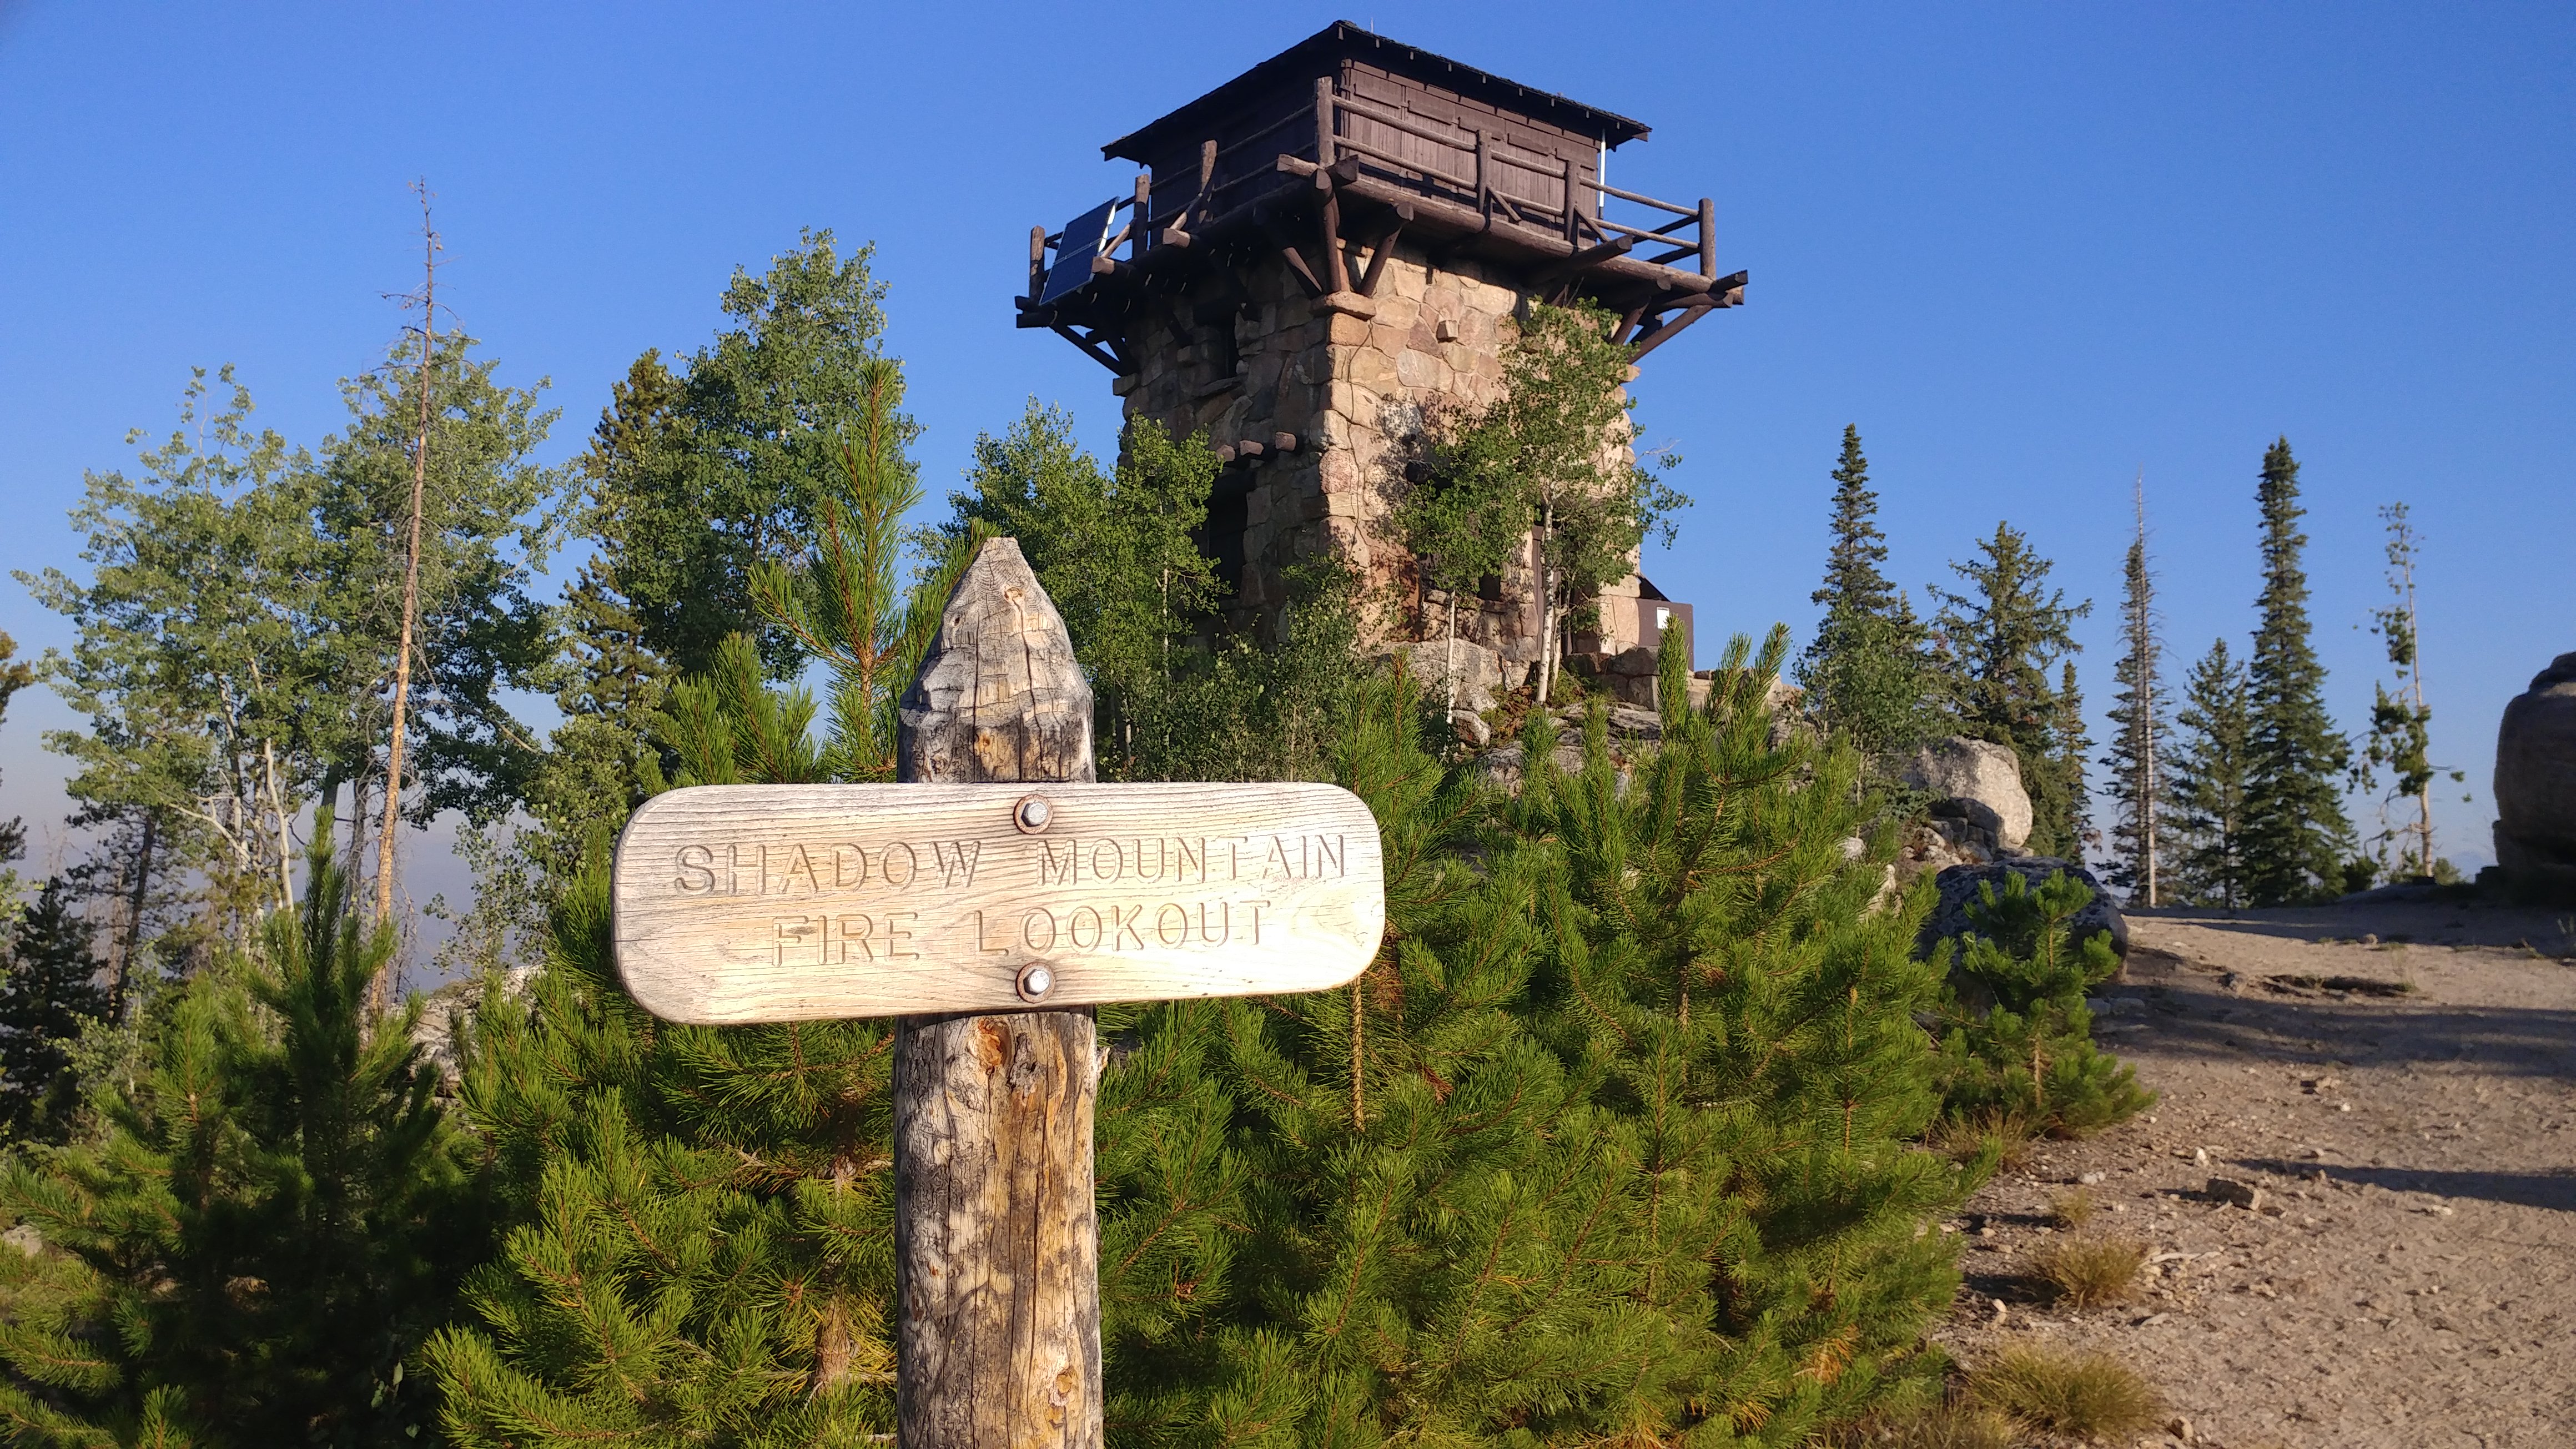 Photo of the sign posted for the Shadow Mountain Fire Lookout. The sign itself is handmade made of a log about five inches in diameter, which serves as the post for the sign and has been whittled into a point at the top. Bolted to the post is a flat wooden plaque in which the name "Shadow Mountain Fire Lookout" has been carved by machine in block letter.  Along the trail in the background stands the fire tower.